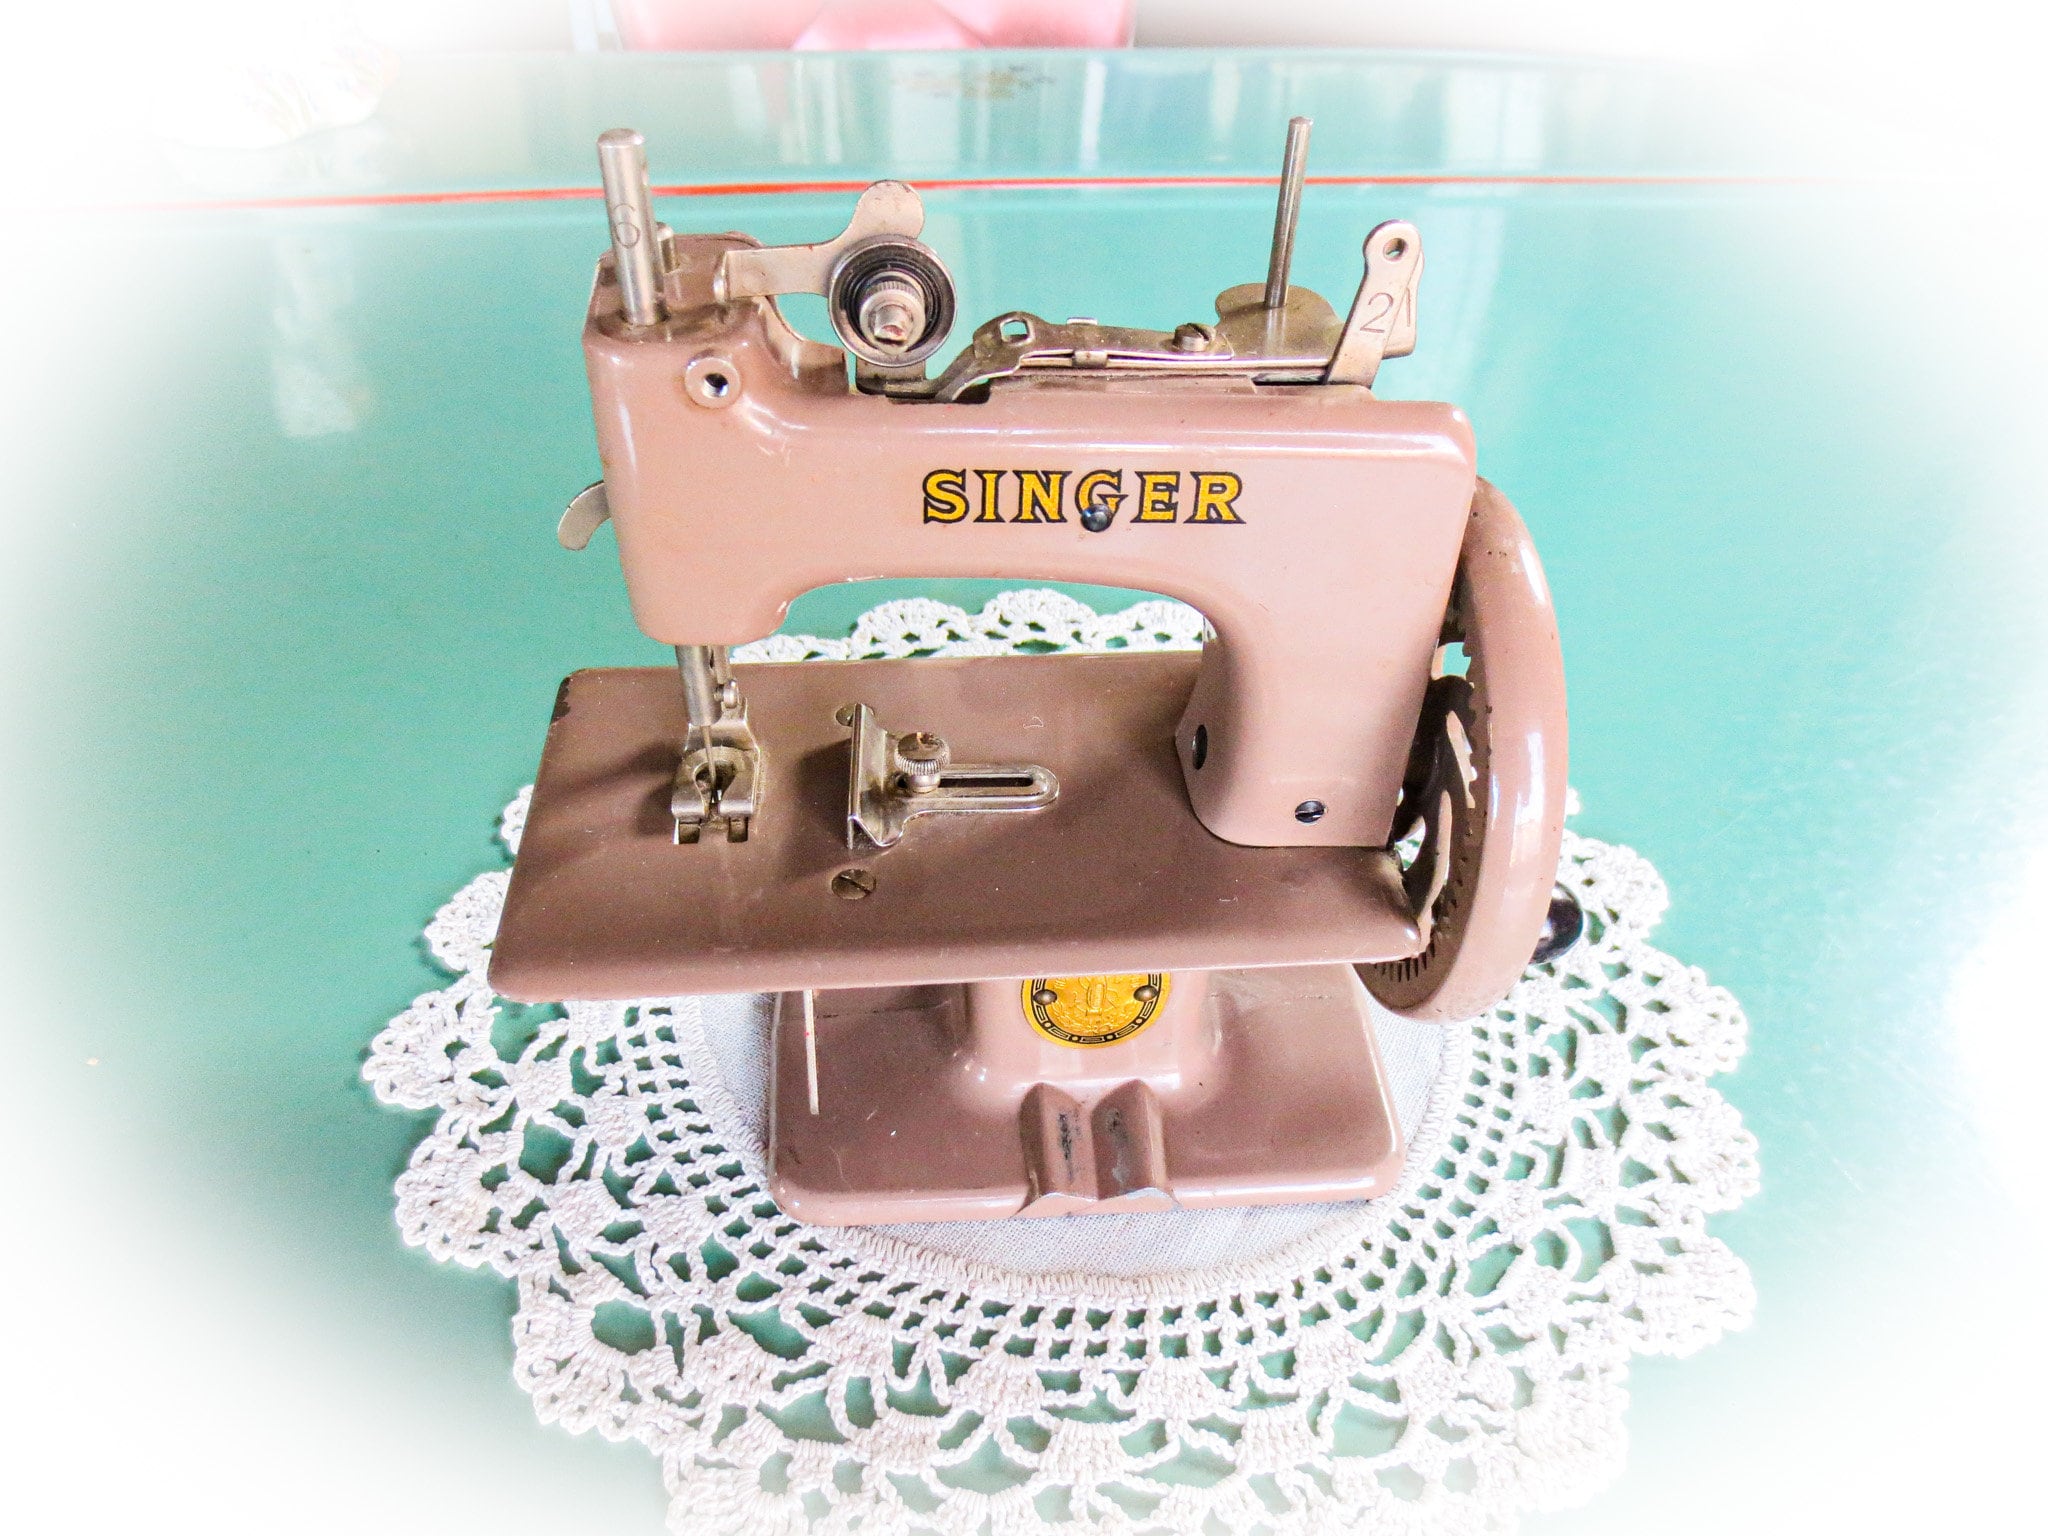 Singer Toy Sewing Machine Needles, Copy of Instructions and Spool Felts  Singer Toy Model 20 Oval Base 7 Spokes NO MACHINE INCLUDED 